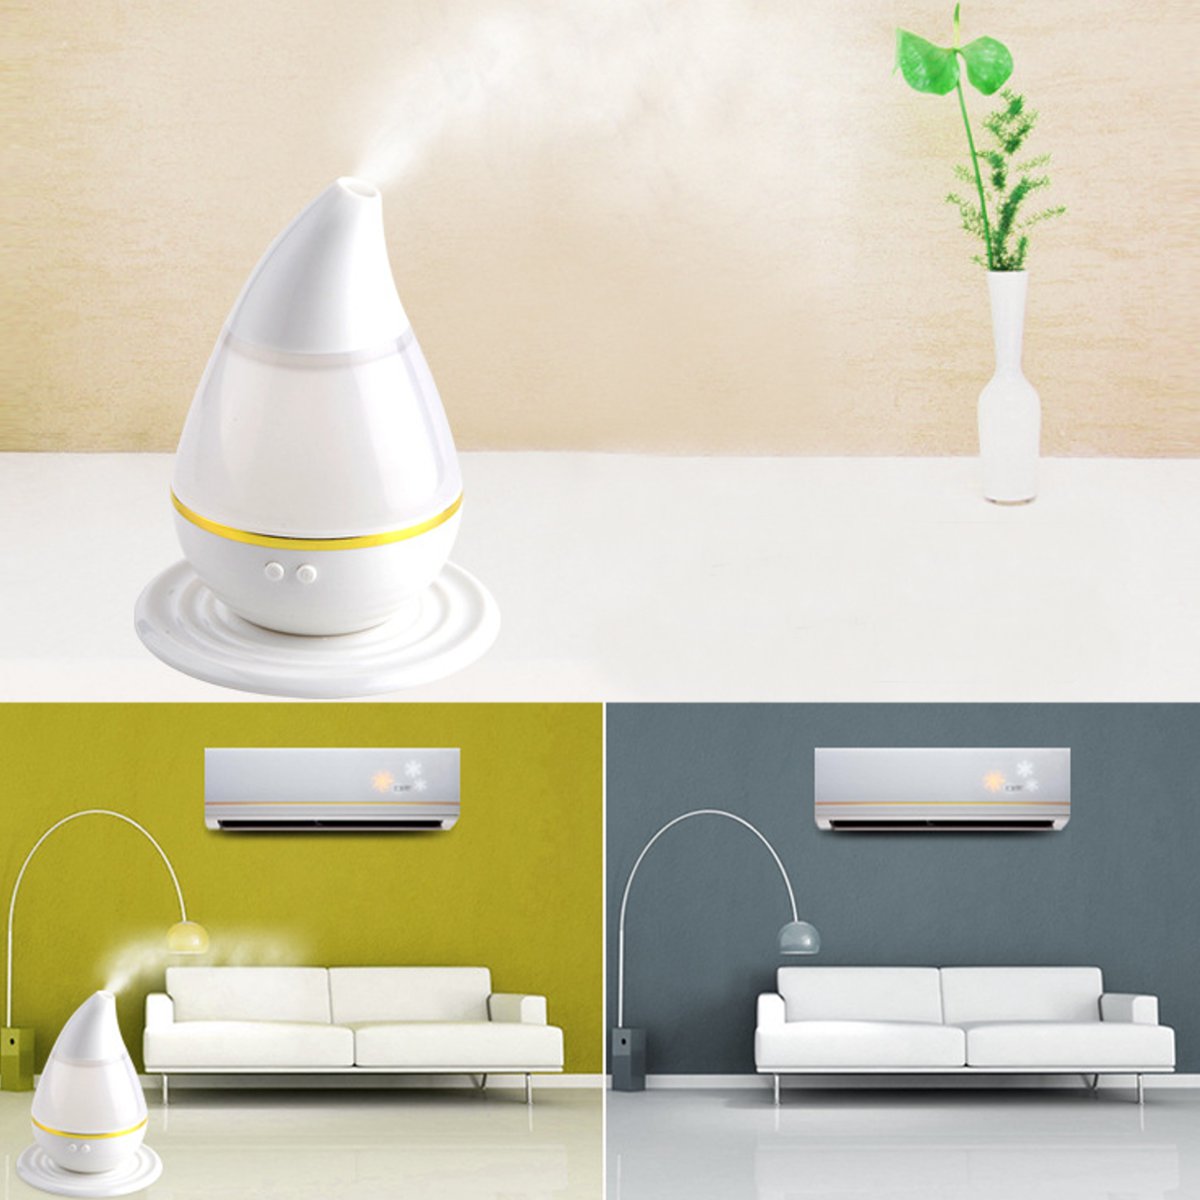 250ml-Ultrasonic-Air-Humidifier-USB-Charging-Essential-Oil-Diffuser-LED-Light-Purifier-for-Home-Offi-1787140-7